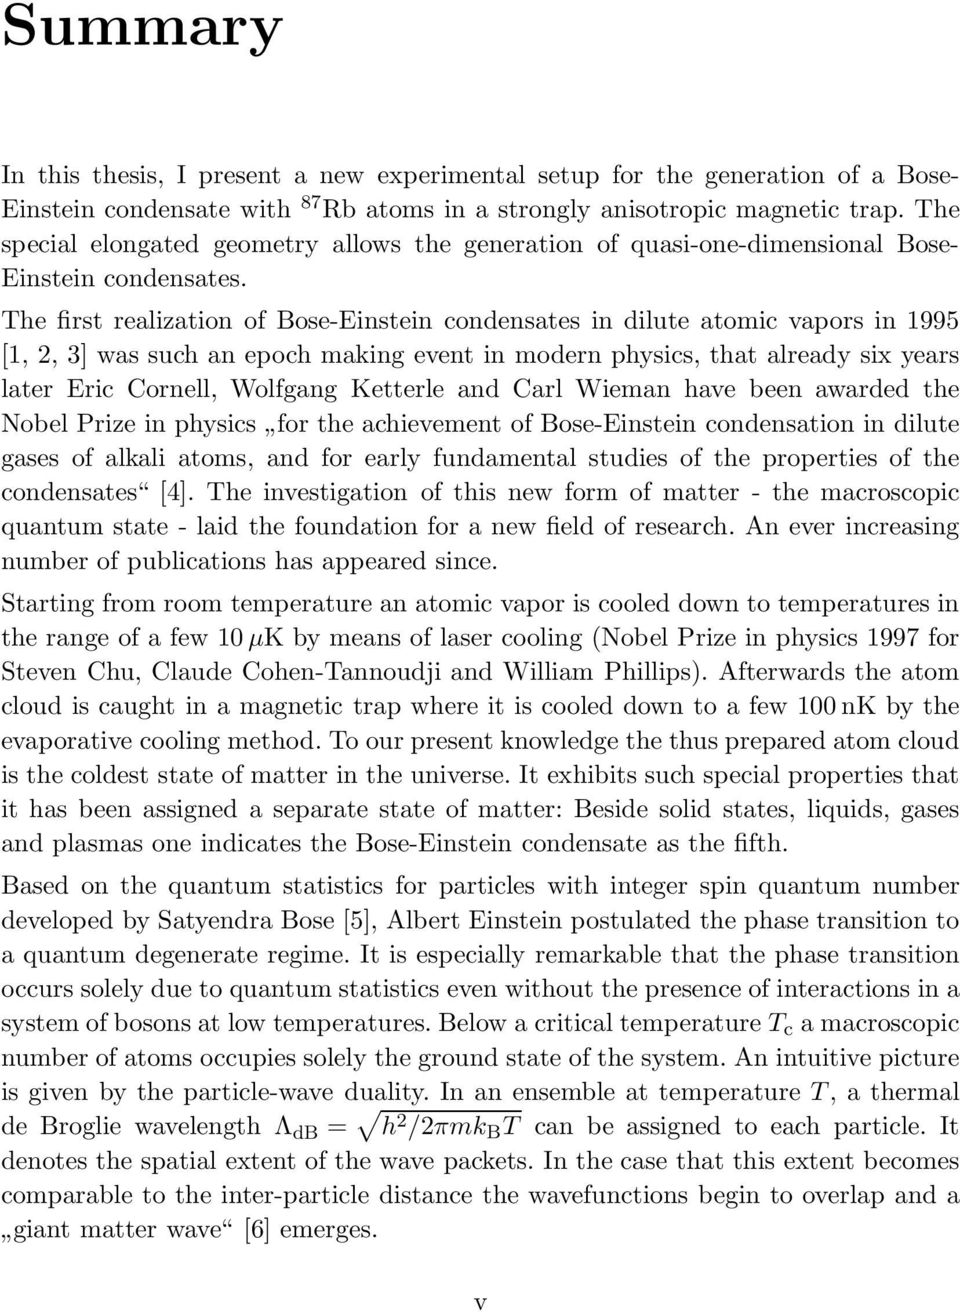 The first realization ofbose-einstein condensates in dilute atomic vapors in 1995 [1, 2, 3] was such an epoch making event in modern physics, that already six years later Eric Cornell, Wolfgang